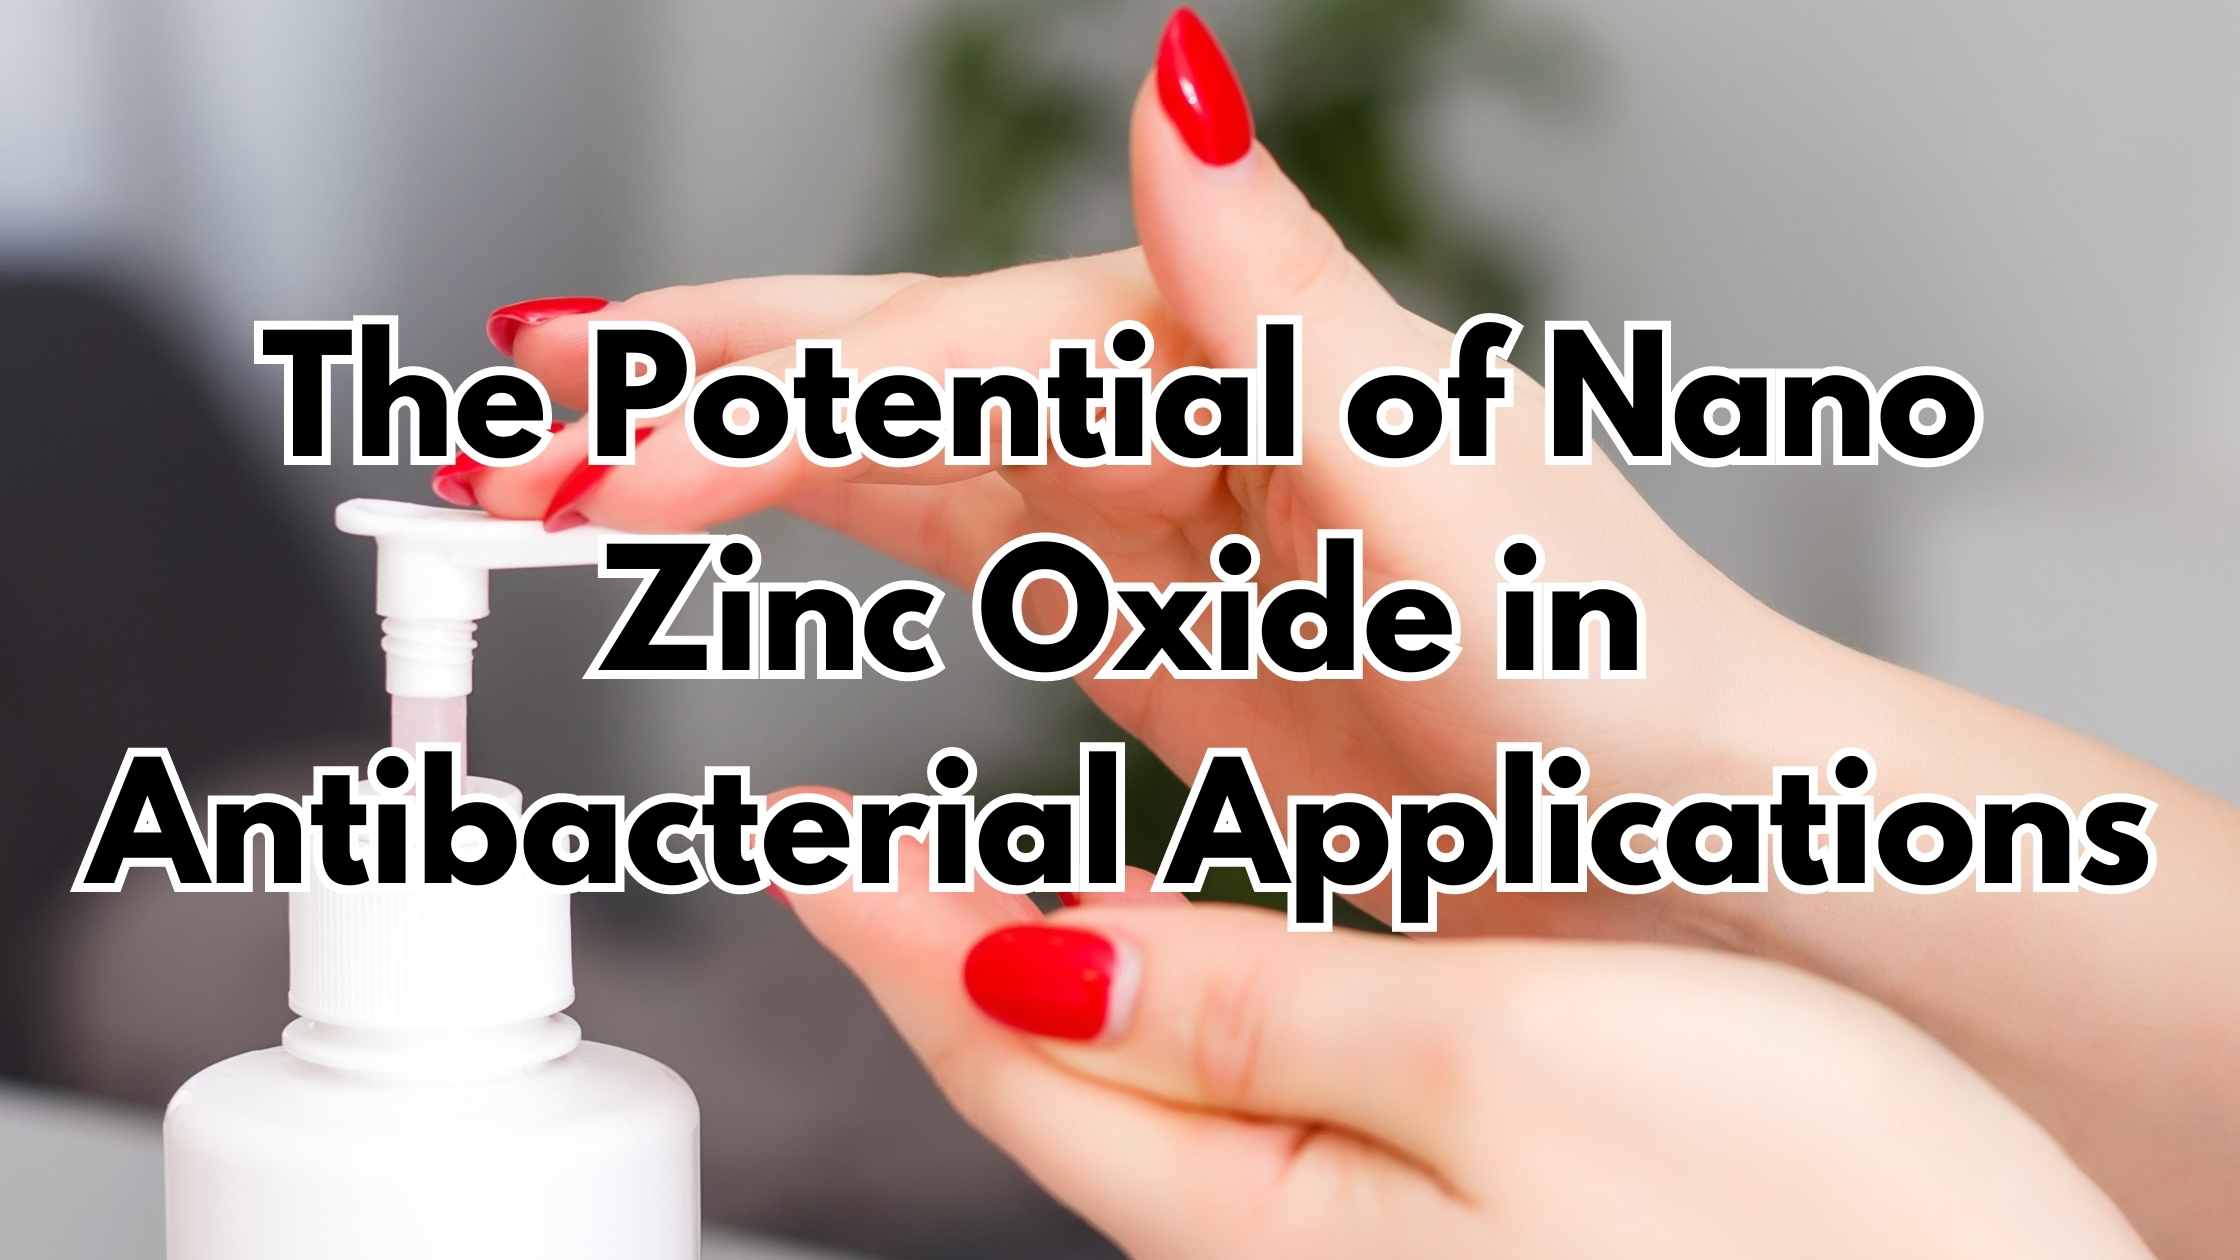 The Potential of Nano Zinc Oxide in Antibacterial Applications